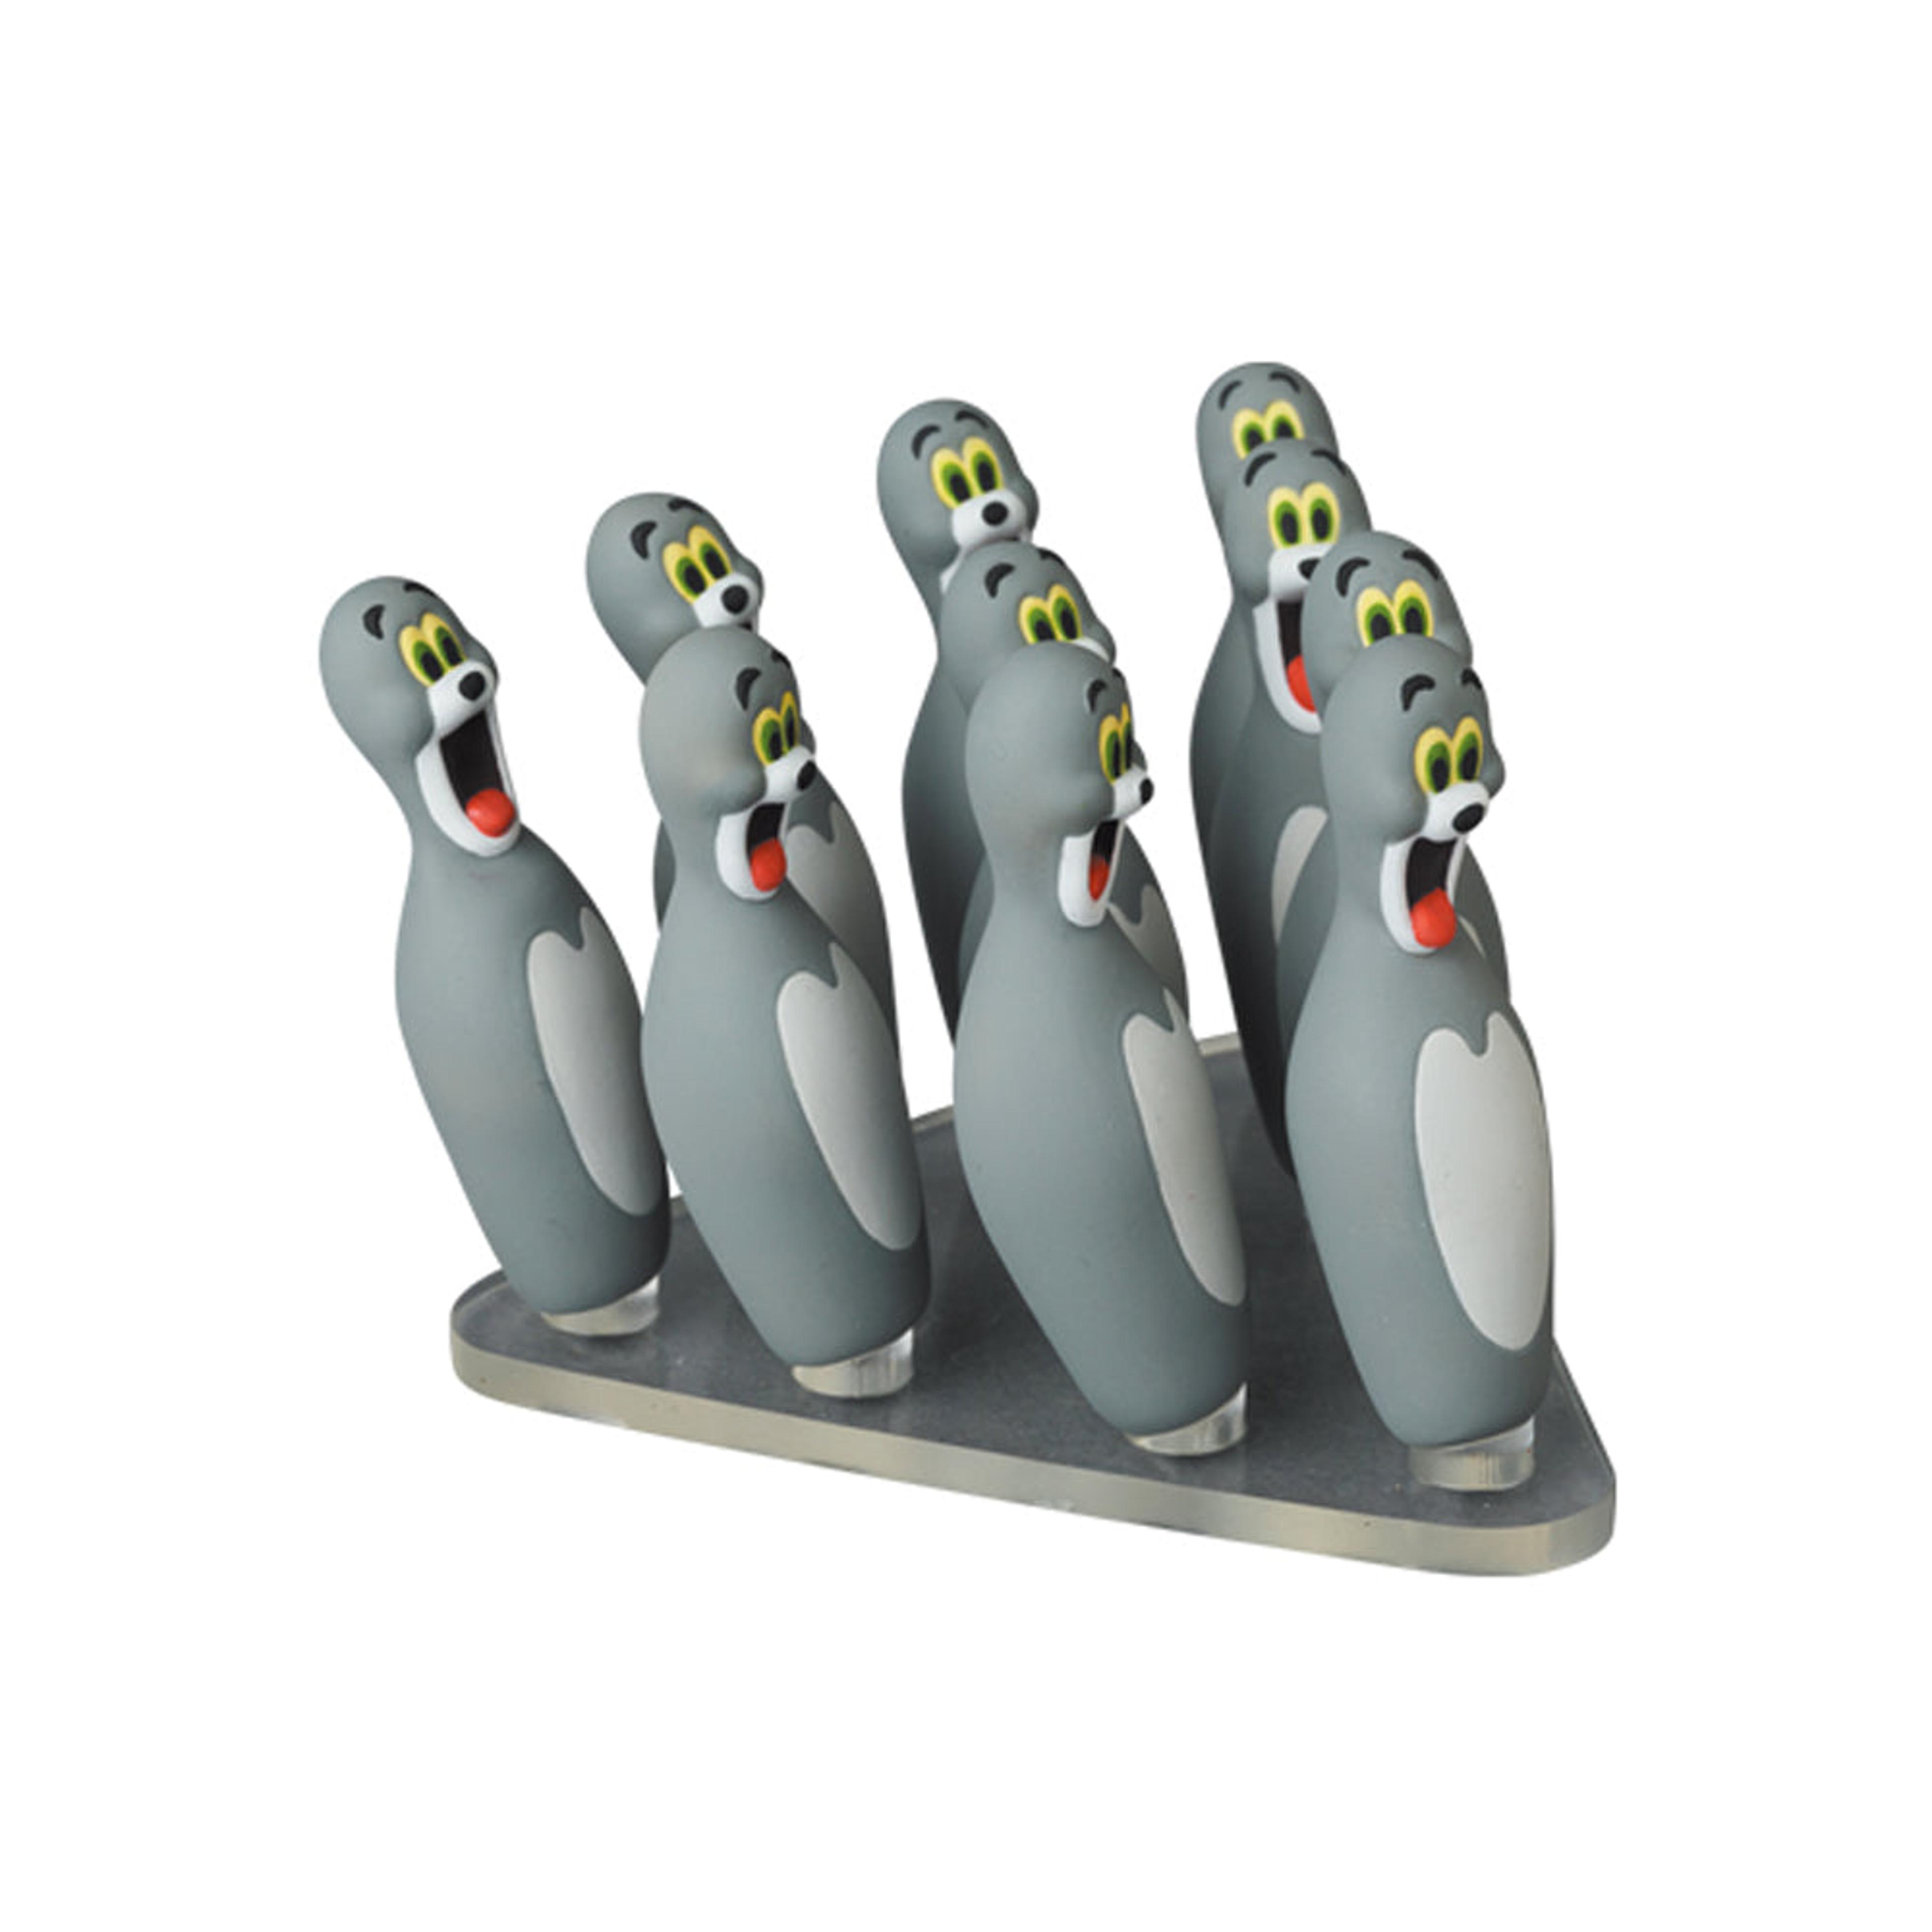 Alternate View 1 of Tom and Jerry Series 3: Tom (Bowling Pins) UDF by Medicom Toy